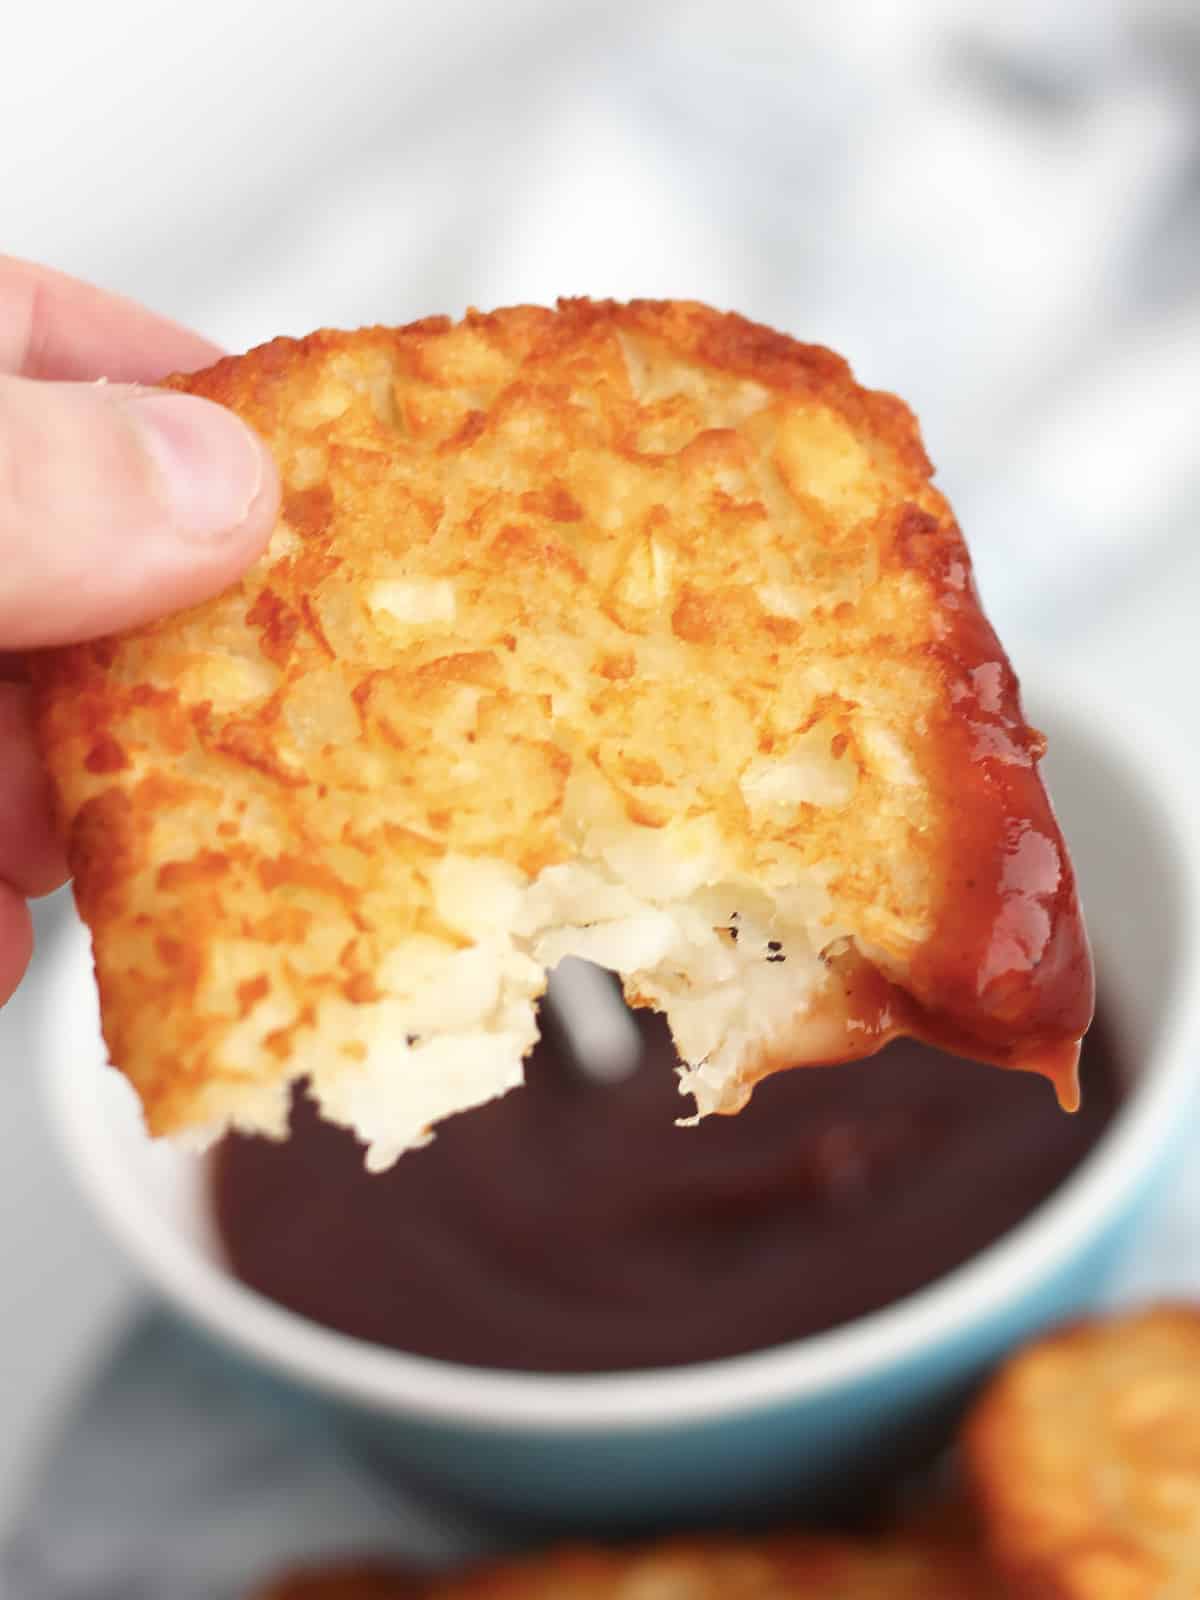 A hash brown broken in half and dipped in sauce.